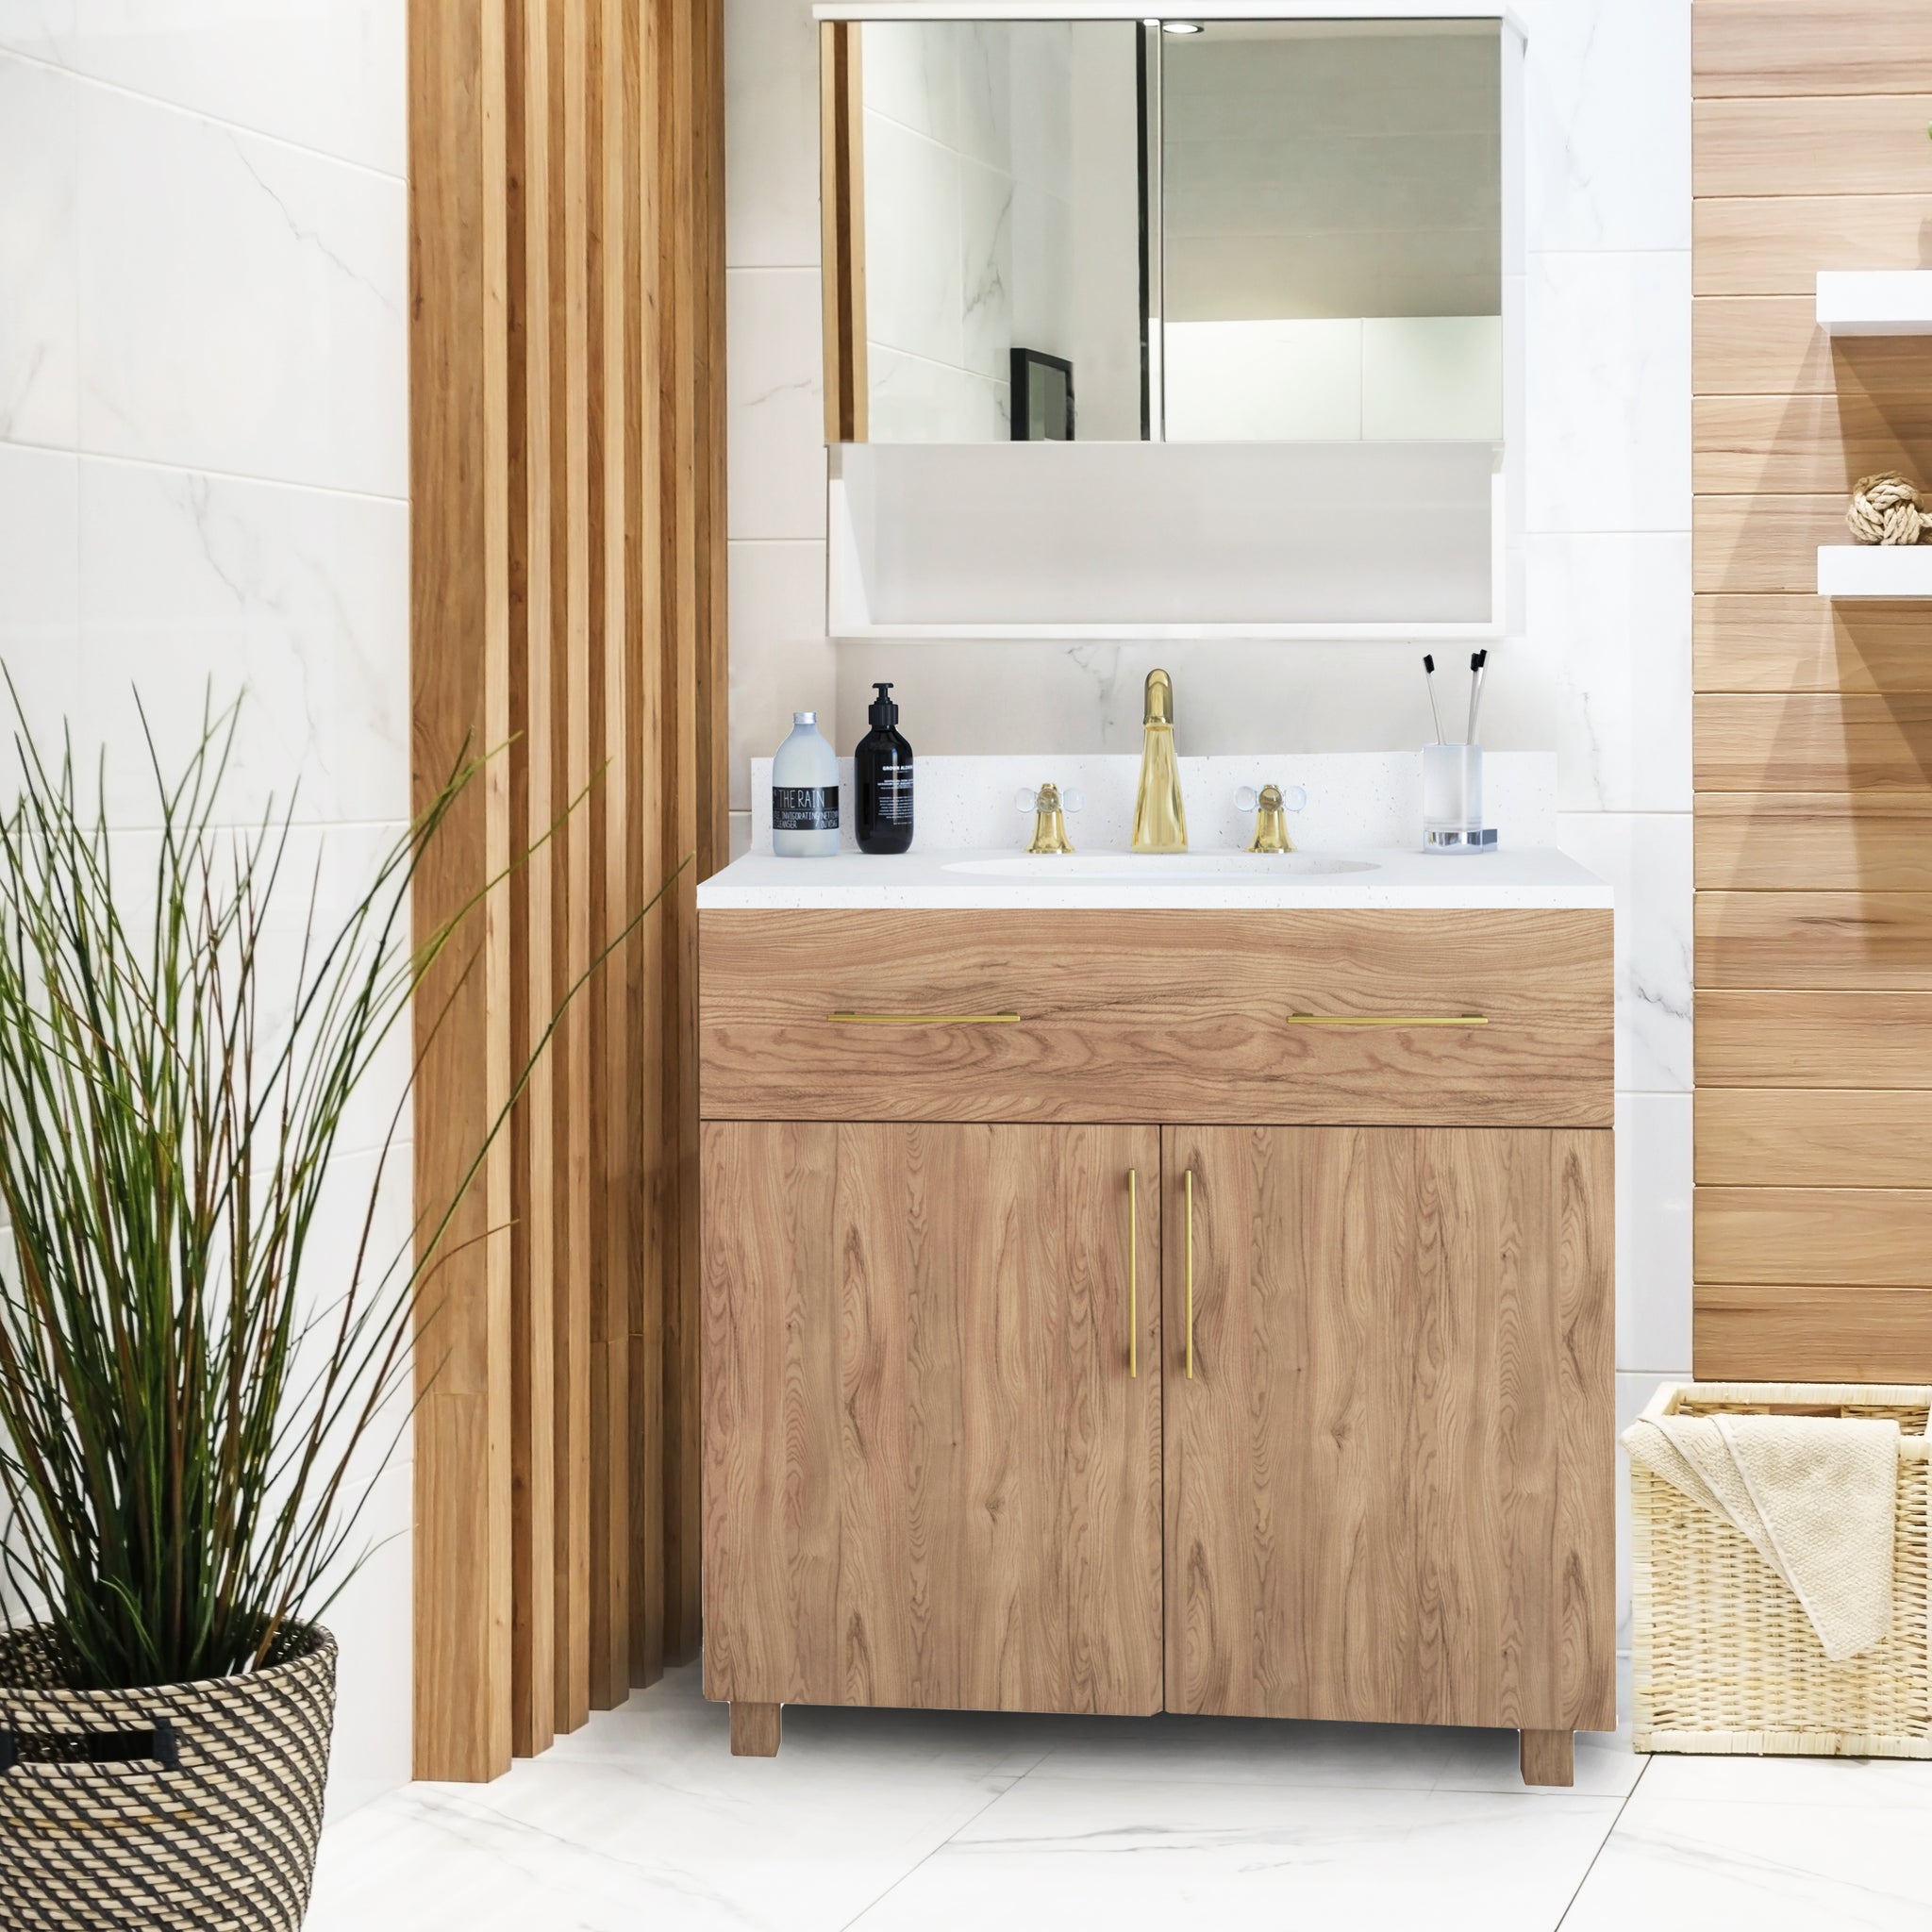 All Bathroom Vanities - A Touch Of Design